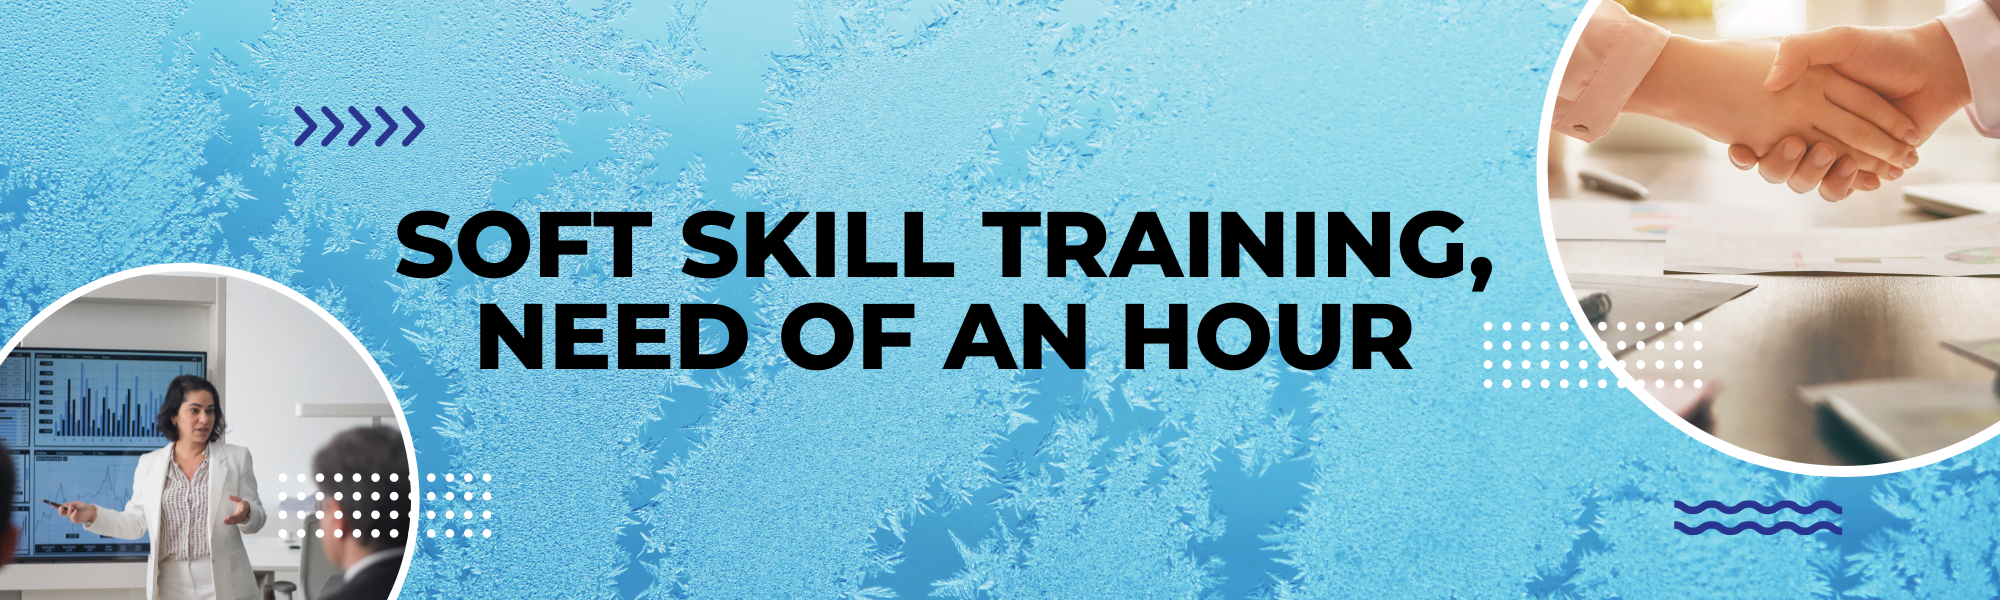 Soft Skill Training, Need of an Hour